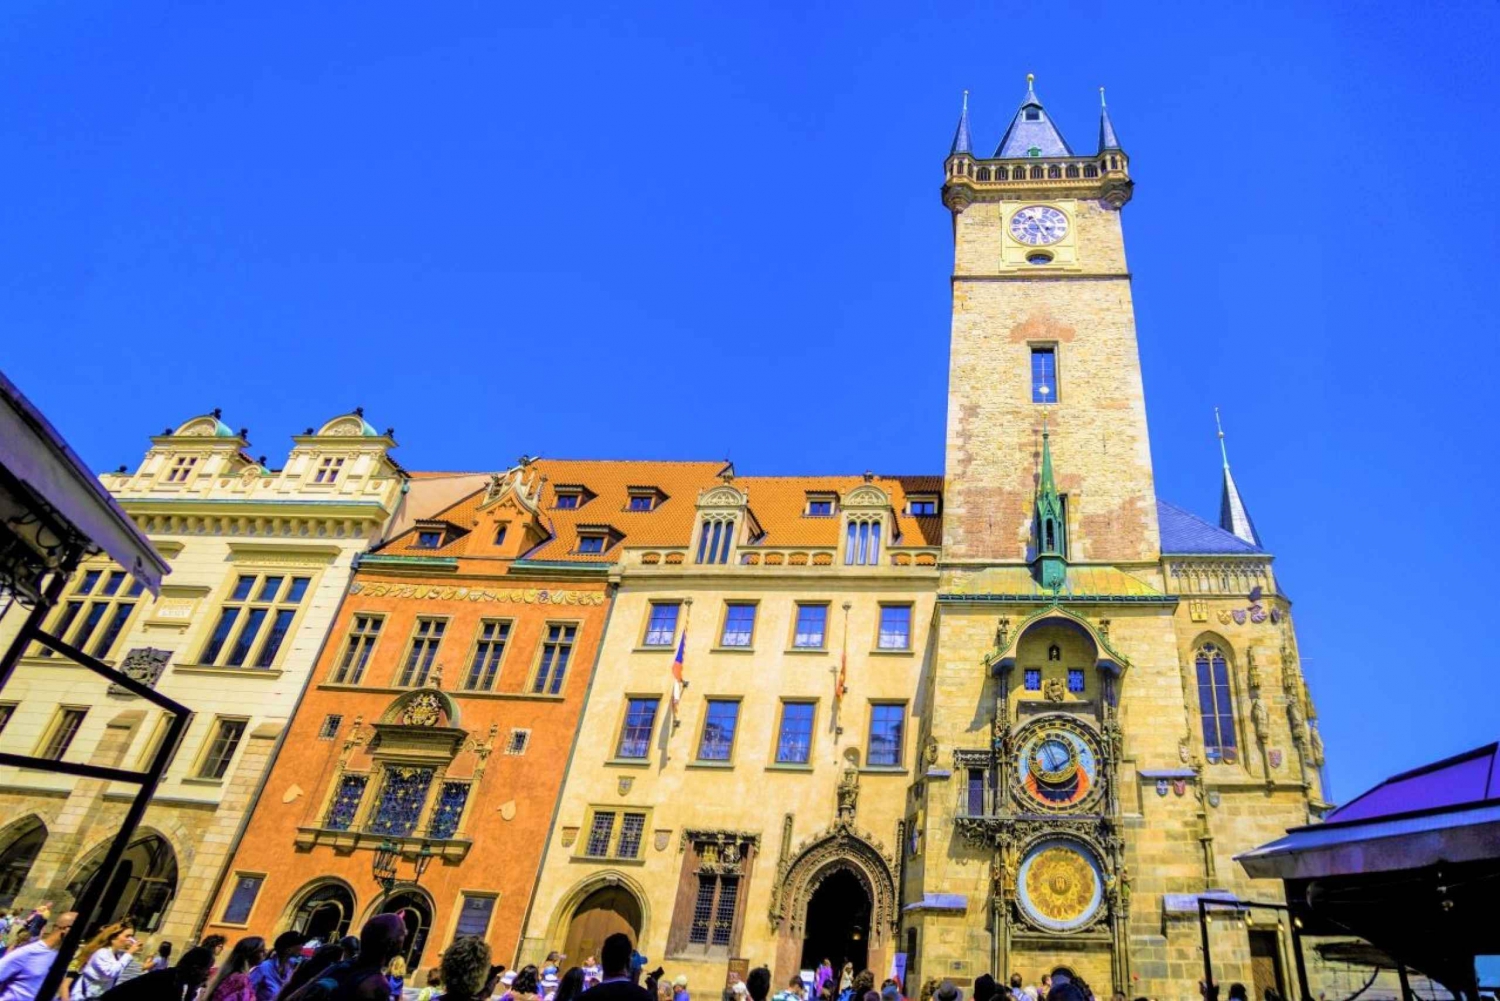 Prague: Astronomical Clock Tower Entry Ticket & Audio Guide